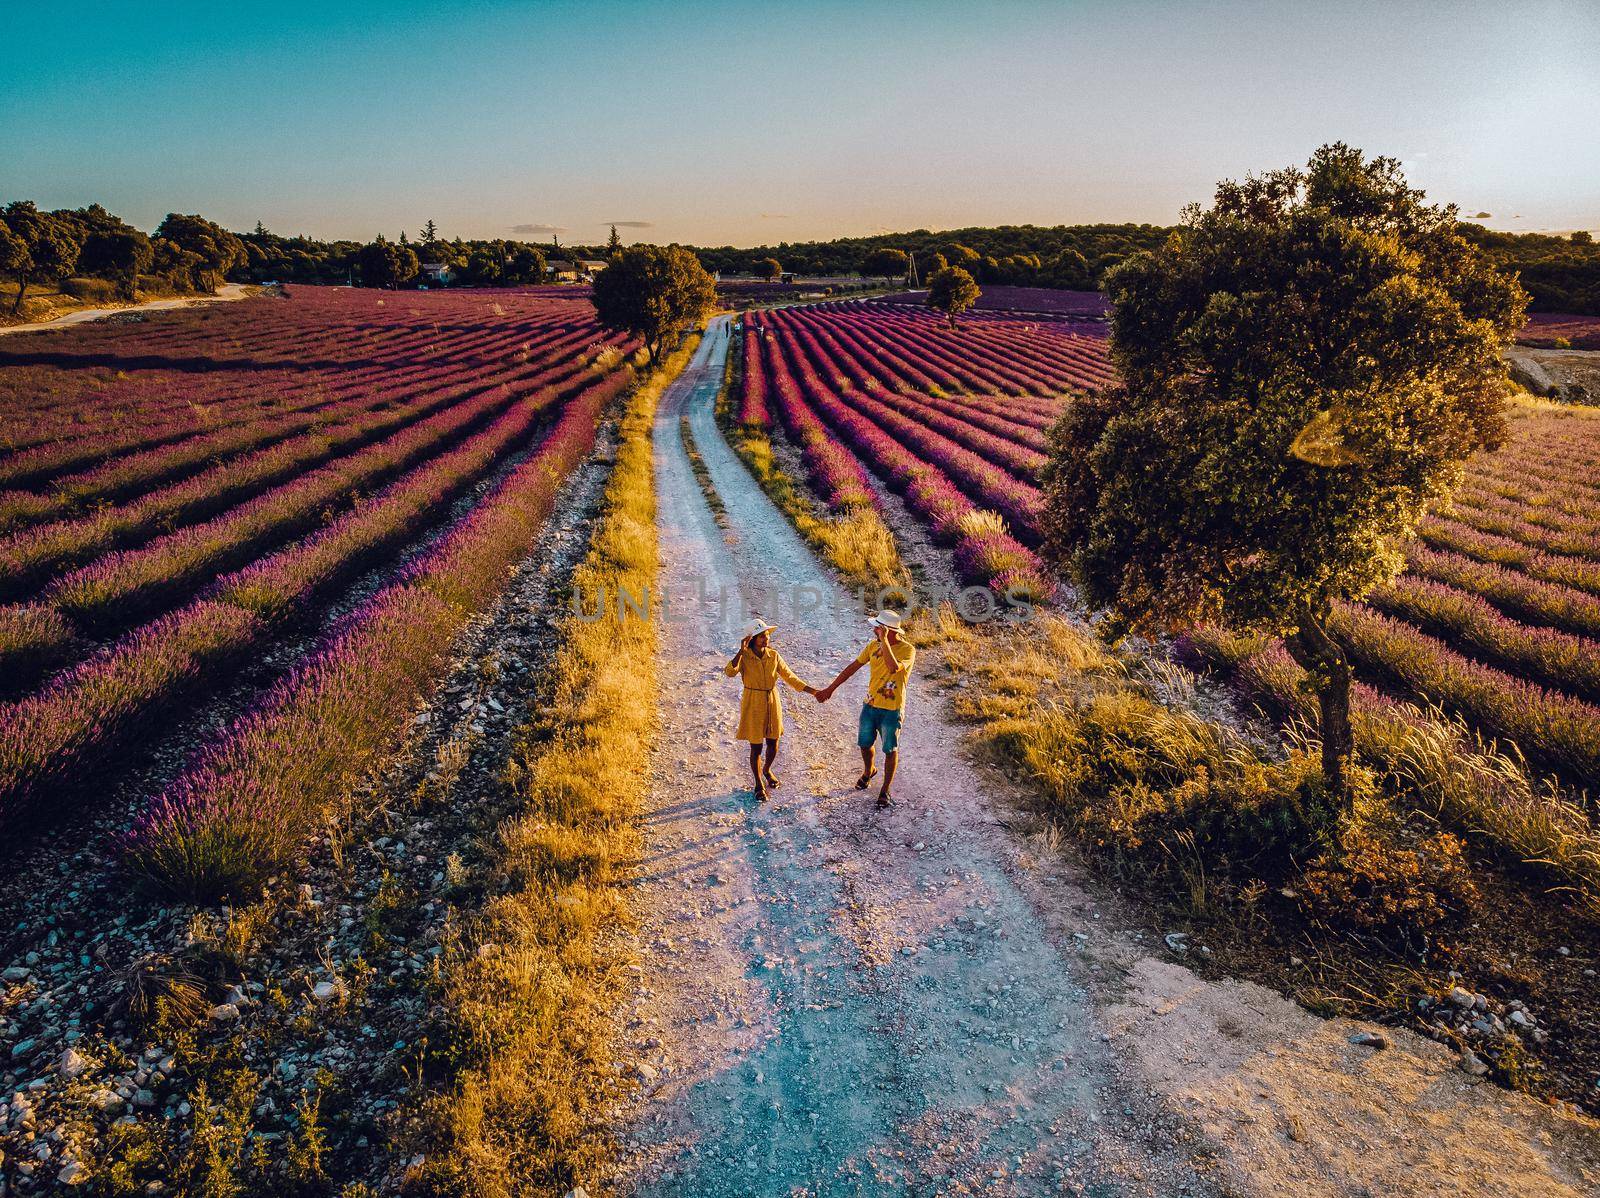 couple on vacation in the Provence France visiting the lavender fields of the Provence France. Europe